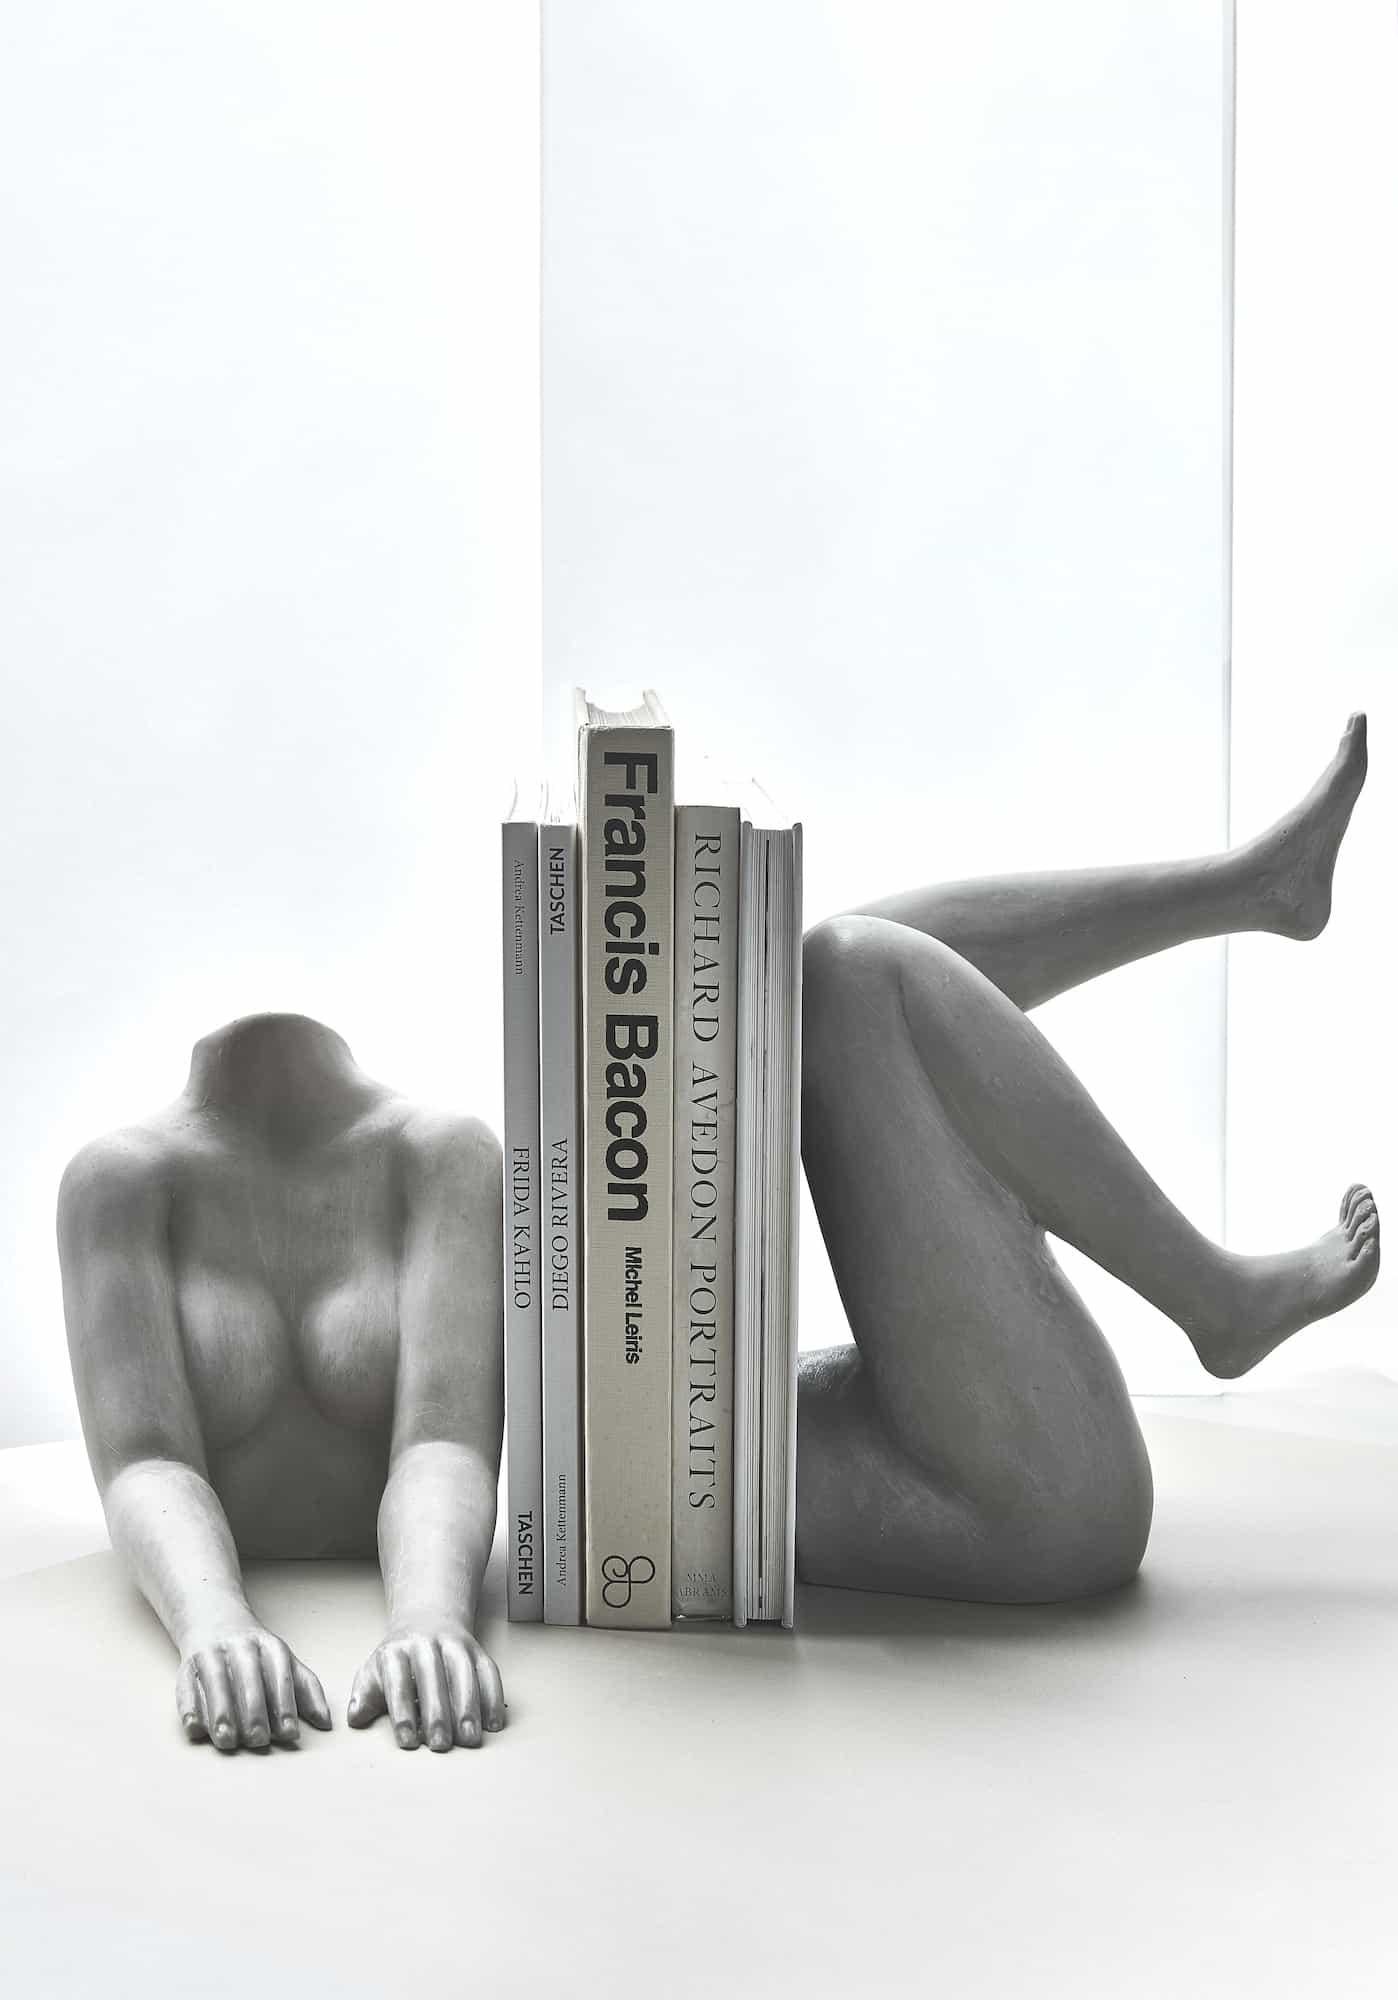 Small Il Corpo bookends by Marcela Cure
Dimensions: Upper W 23 x D 12 x H 14 cm / Lower W 17 x D 11 x H 21 cm
Materials: resin and stone composite

Our Il Corpo sculpture is a set of two individual sculptures portraying the upper and lower body